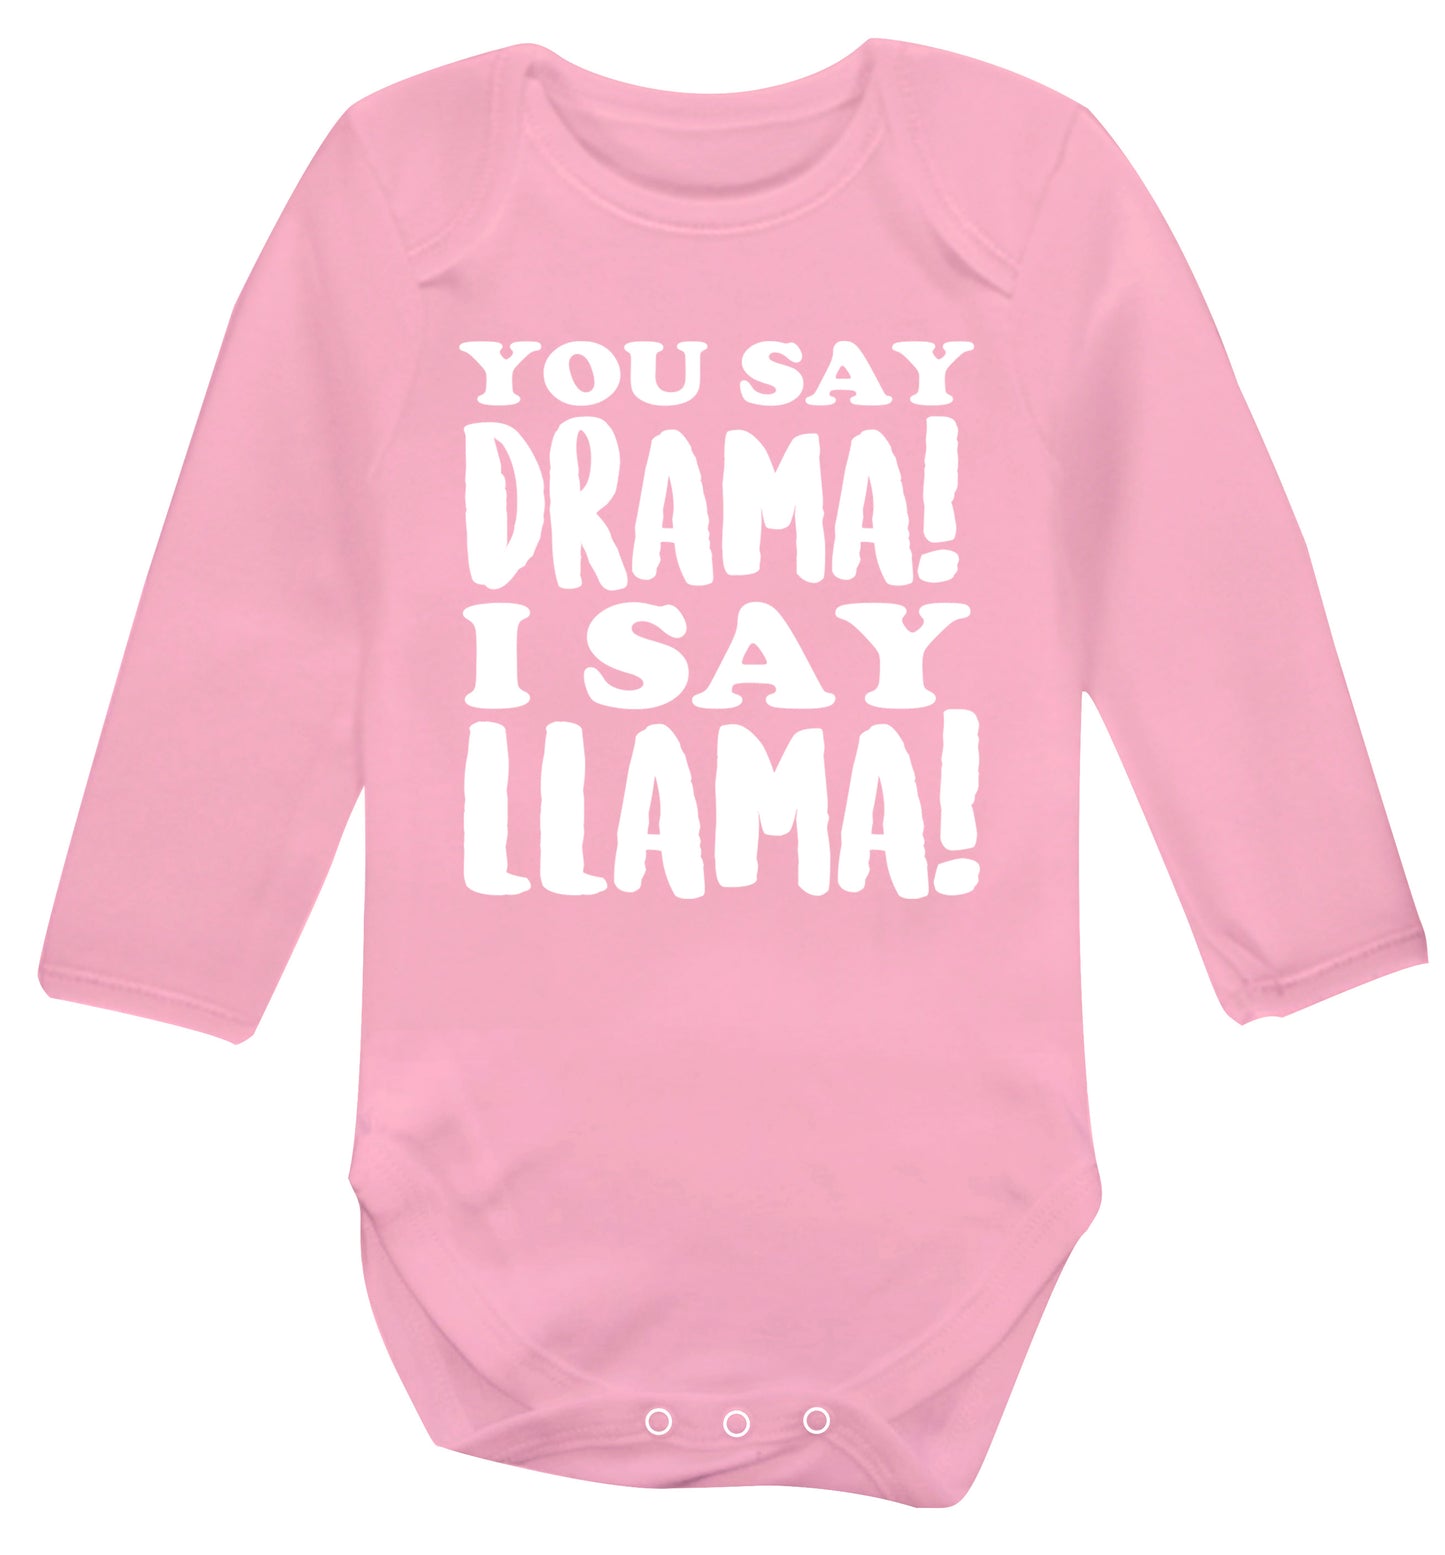 You say drama I say llama! Baby Vest long sleeved pale pink 6-12 months